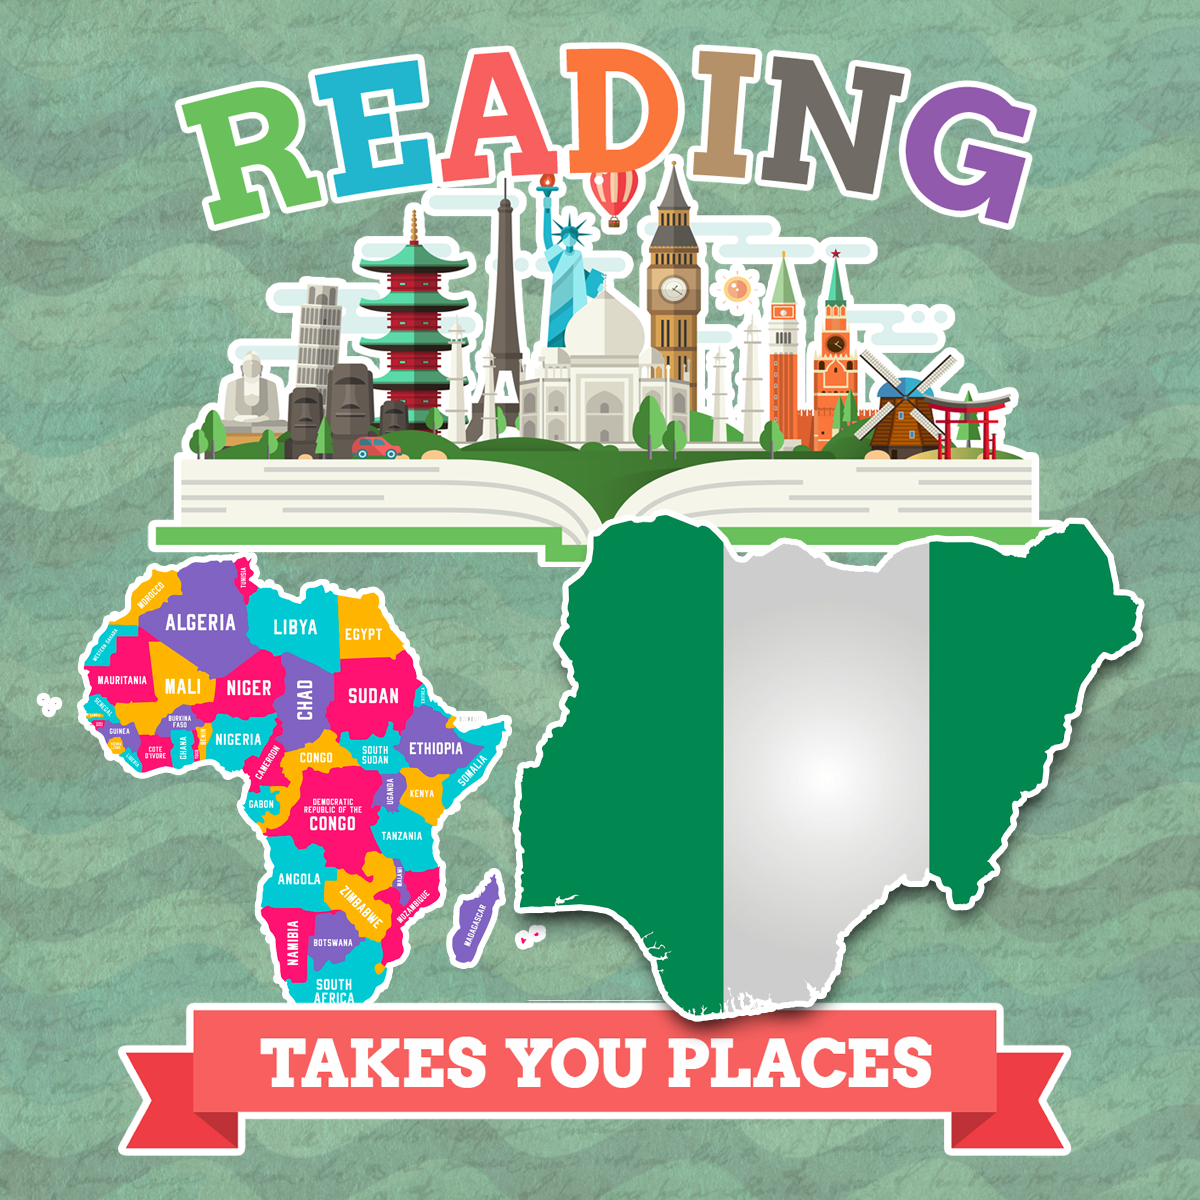 This week we are visiting Nigeria for summer reading!